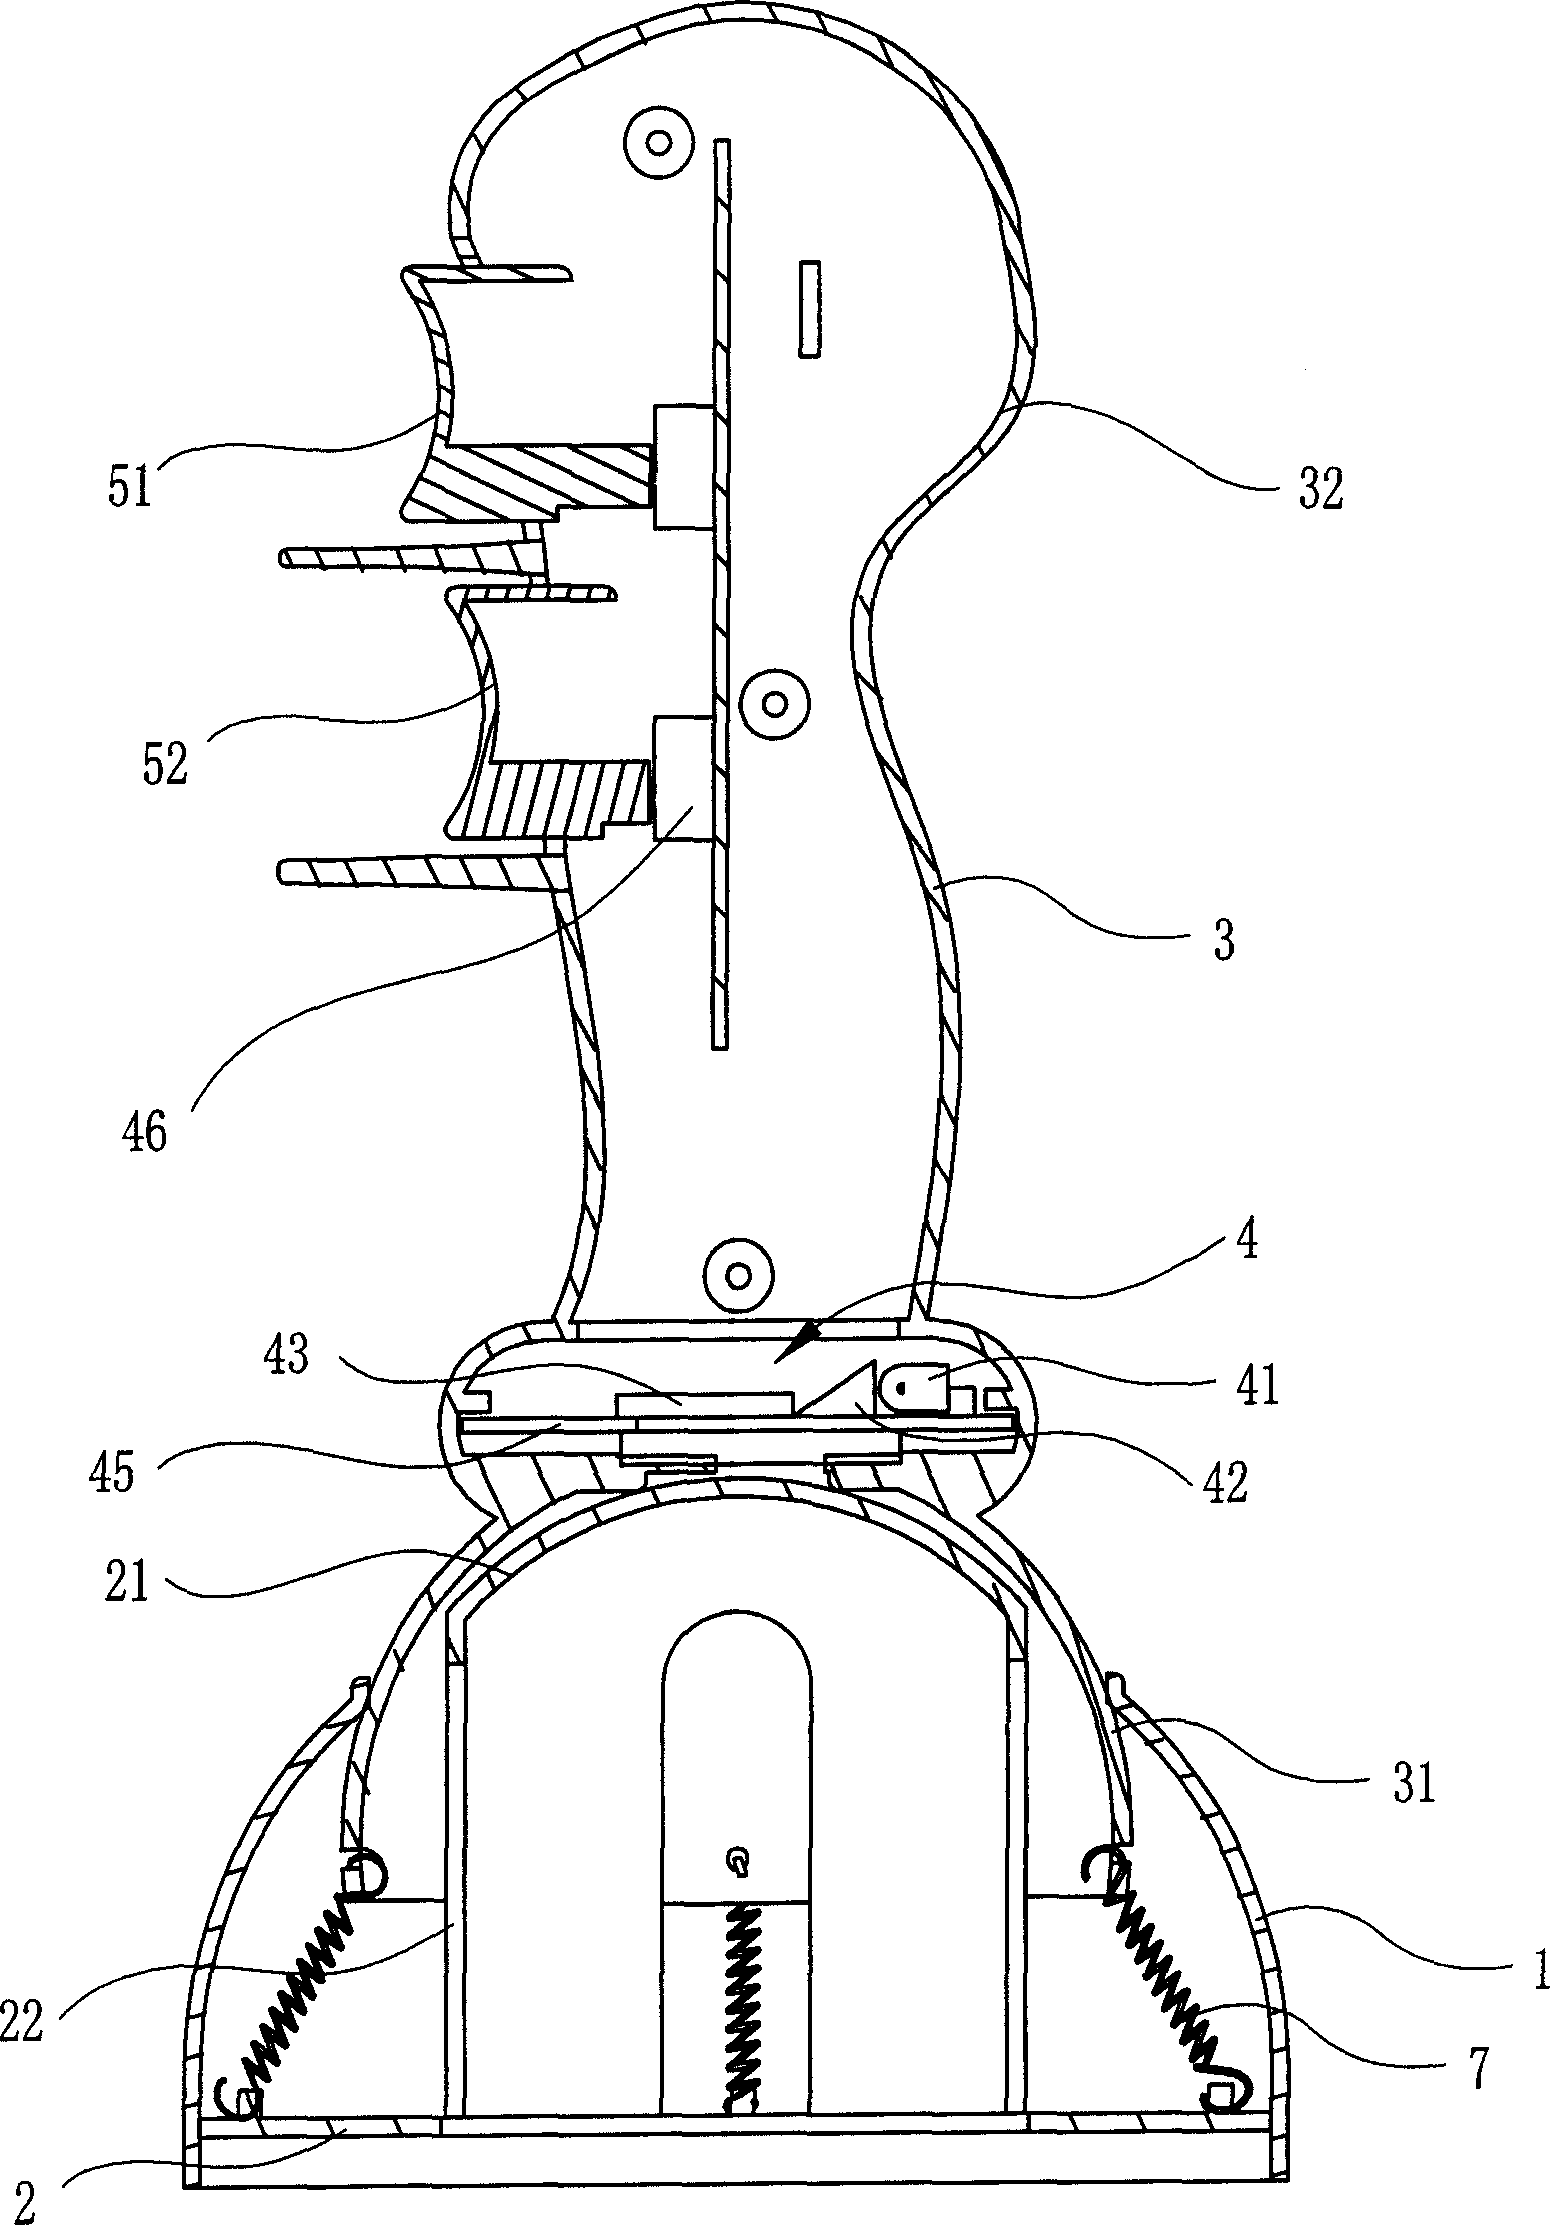 Operating lever type optical mouse